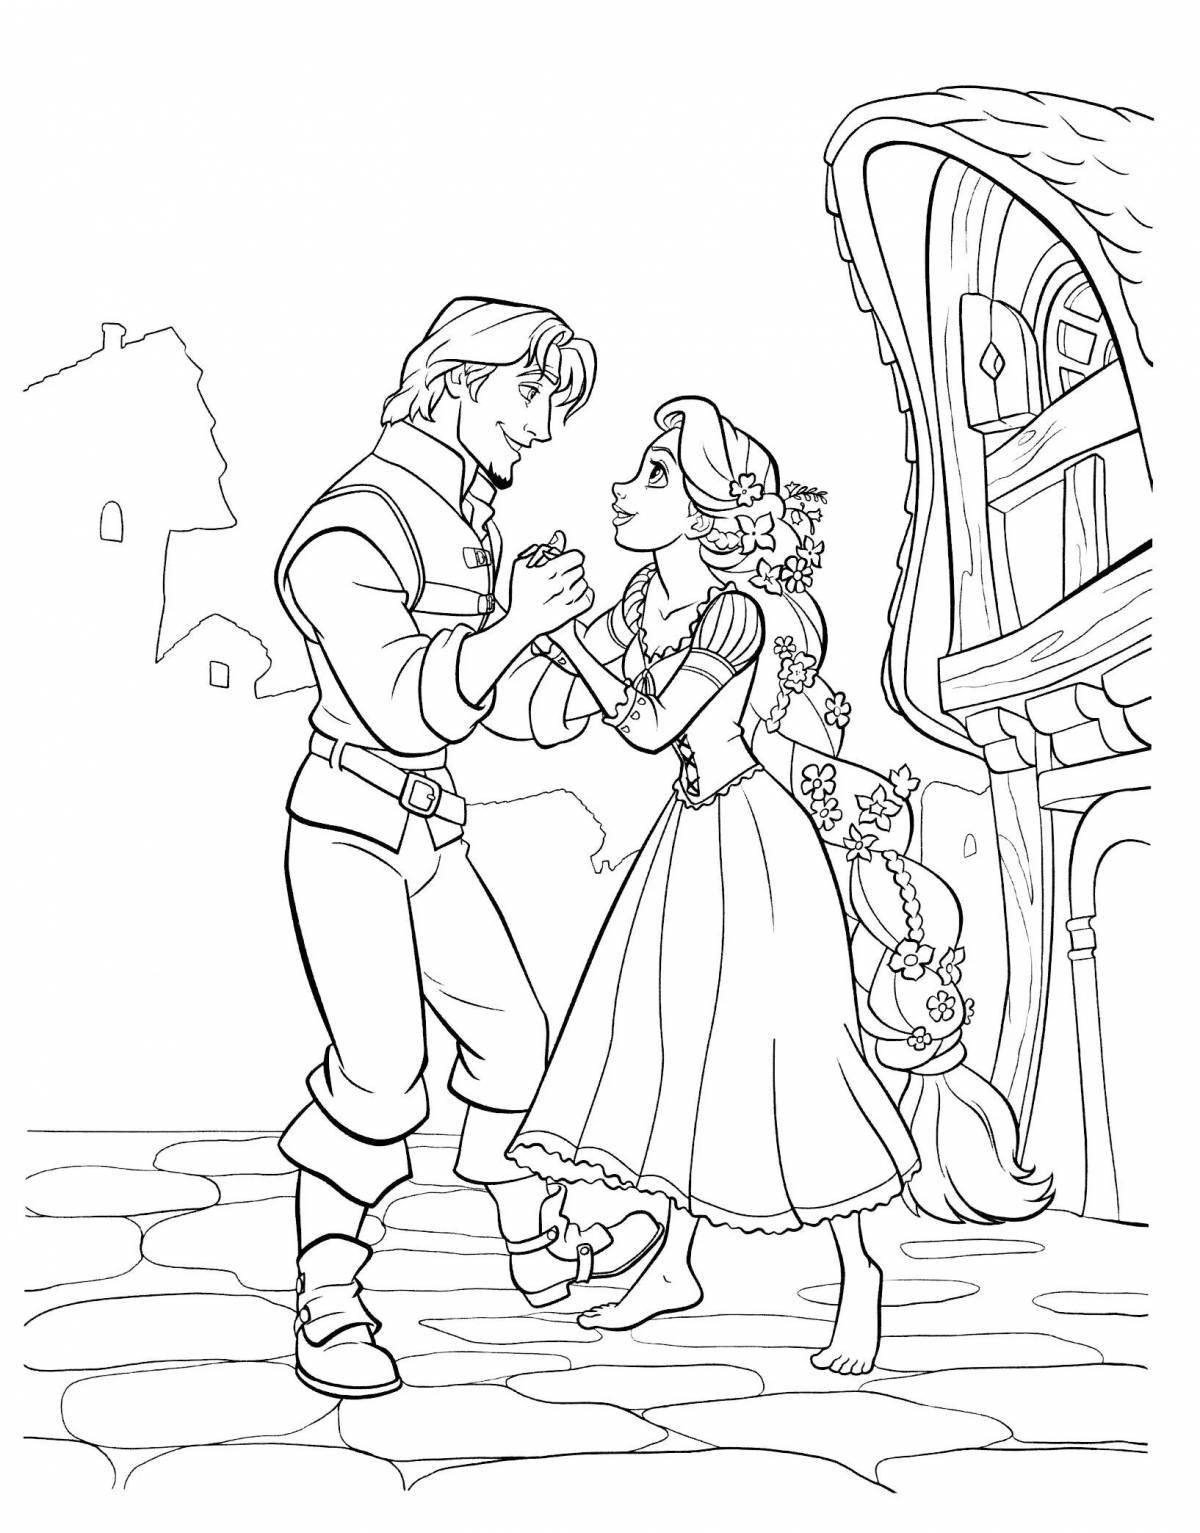 Amazing rapunzel coloring book for kids